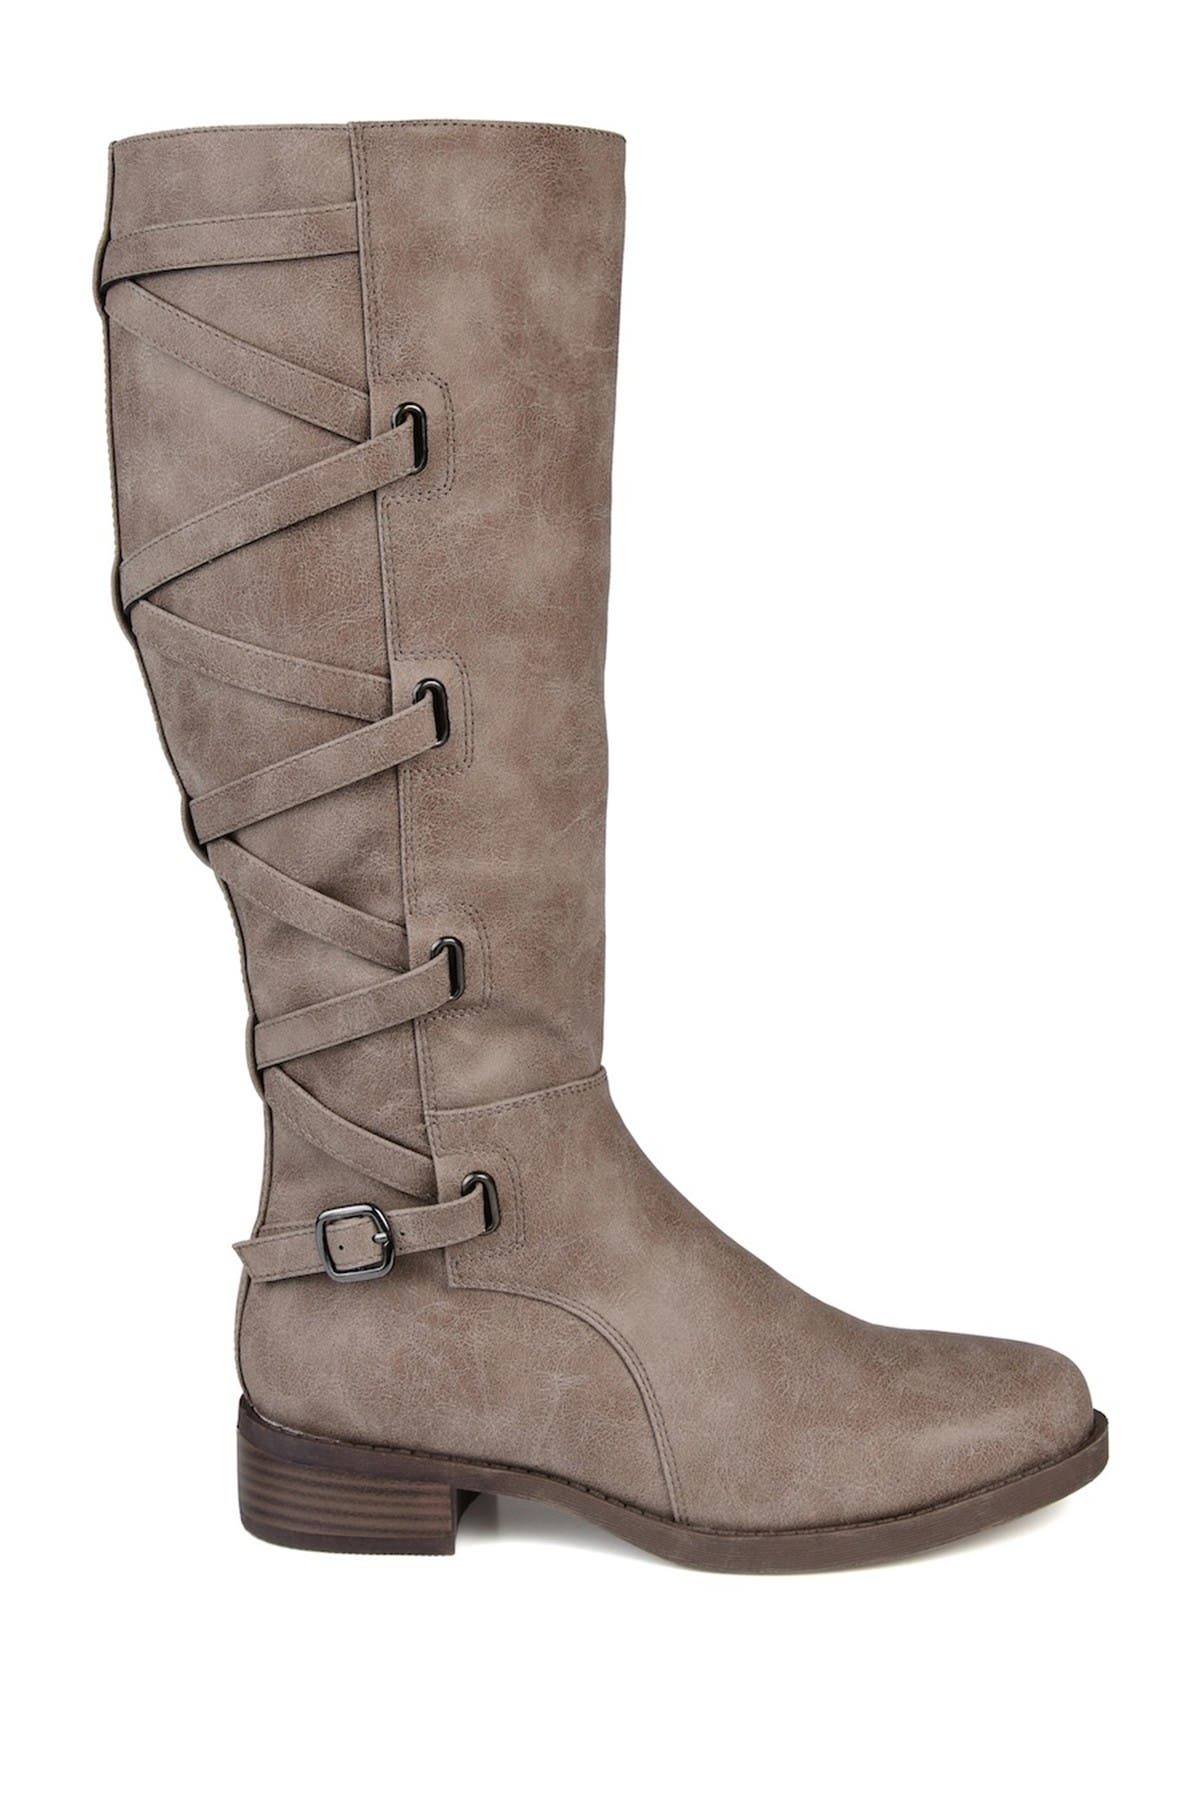 Journee Collection Carly Lace Back Boot In Medium Beige